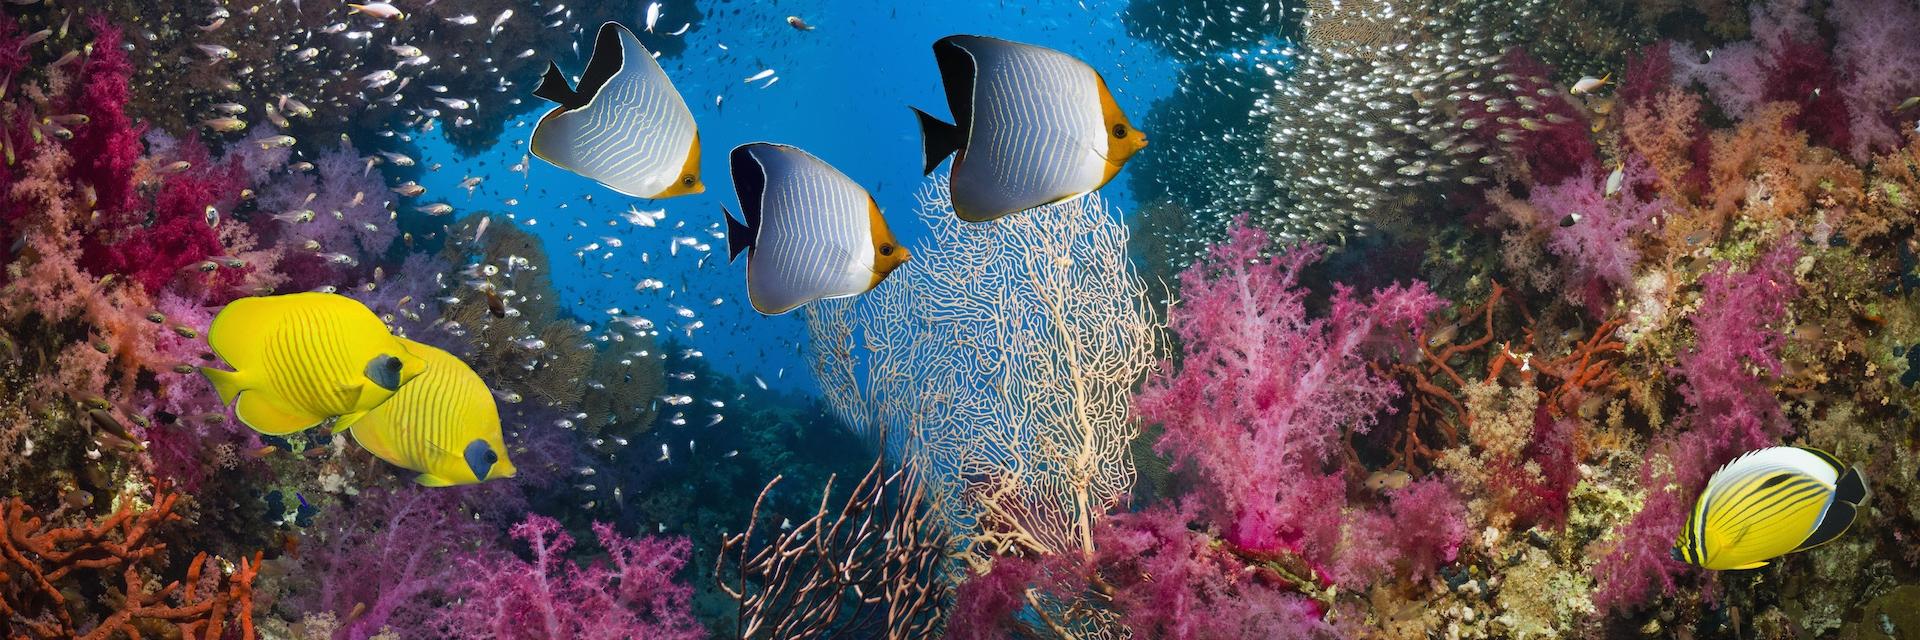 Coral reef scenery with a pair of golden butterflyfish